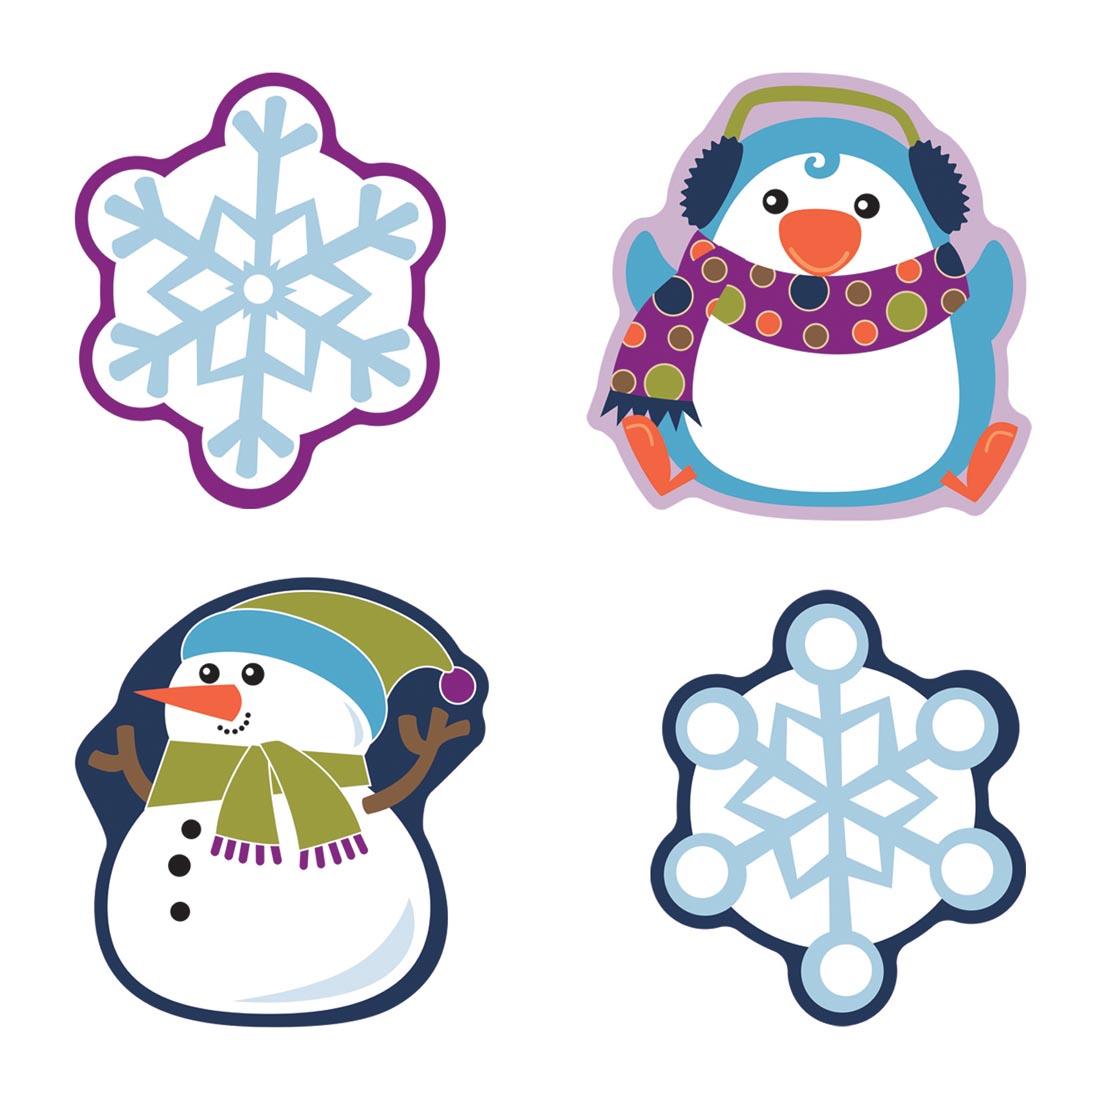 Penguin, Snowman and Snowflakes are part of the Winter Mix Assorted Colorful Cut-Outs by Carson Dellosa